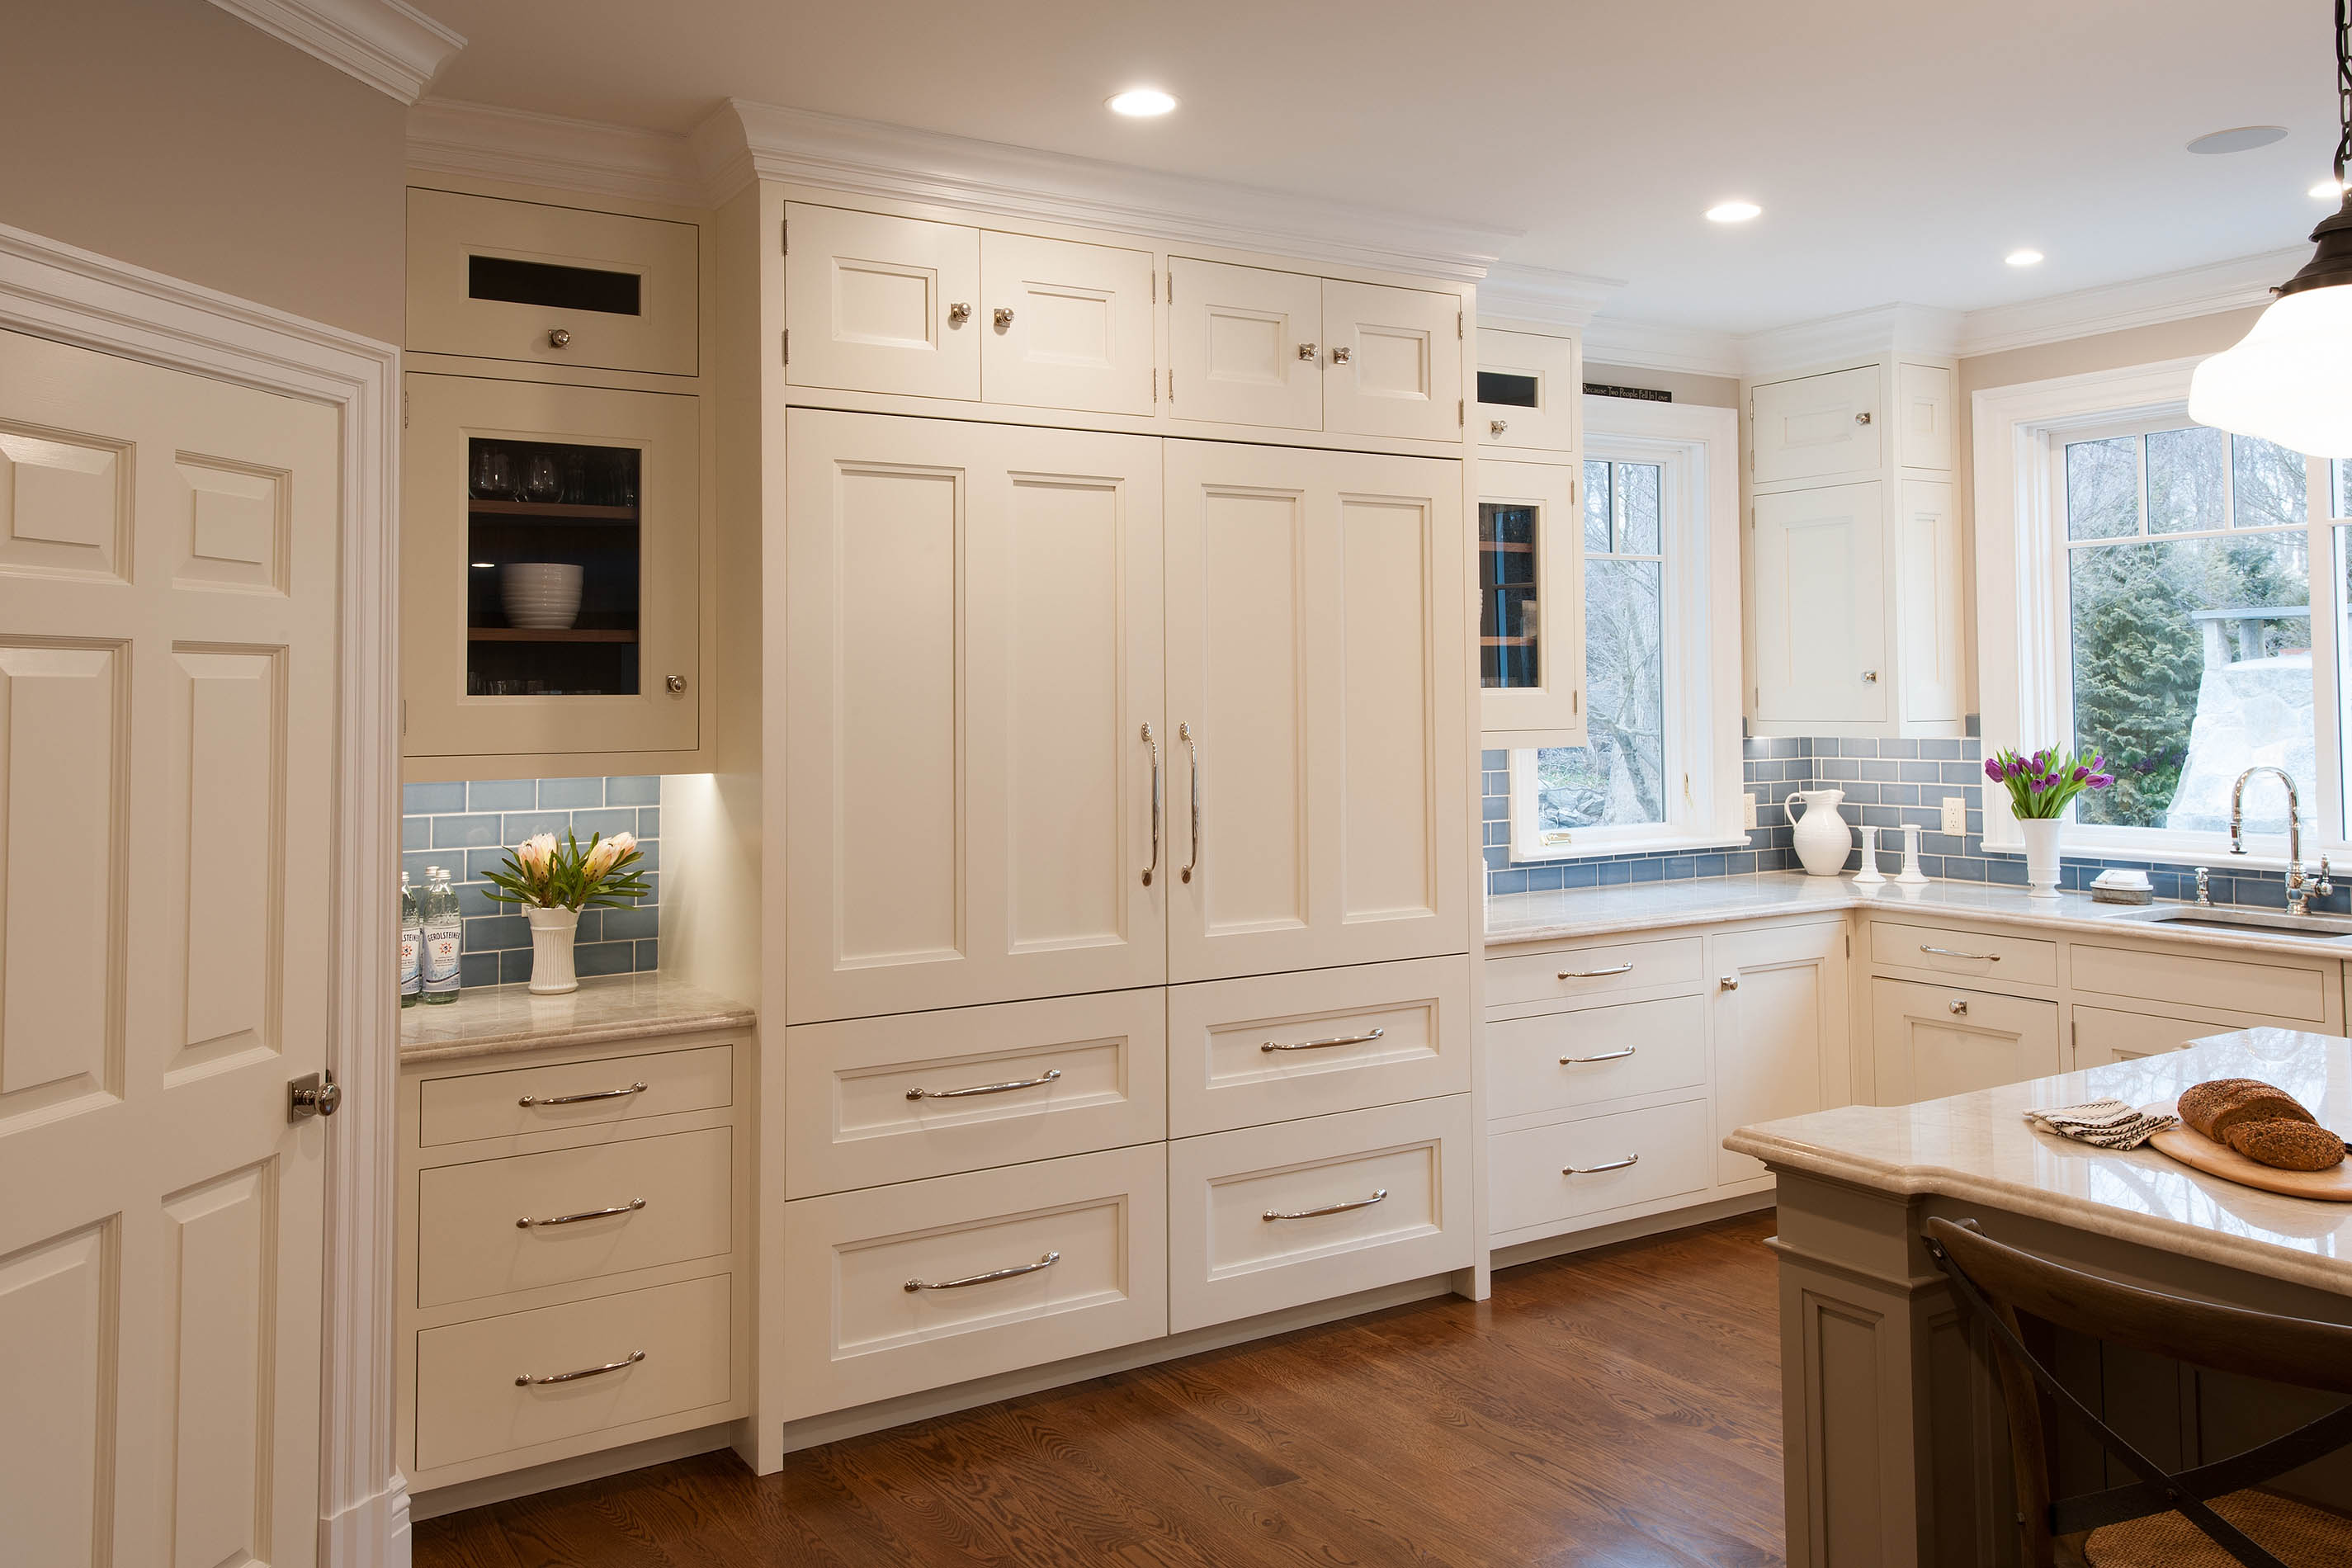 Homes Gallery 125 Custom cabinetry from Crown Point Cabinetry